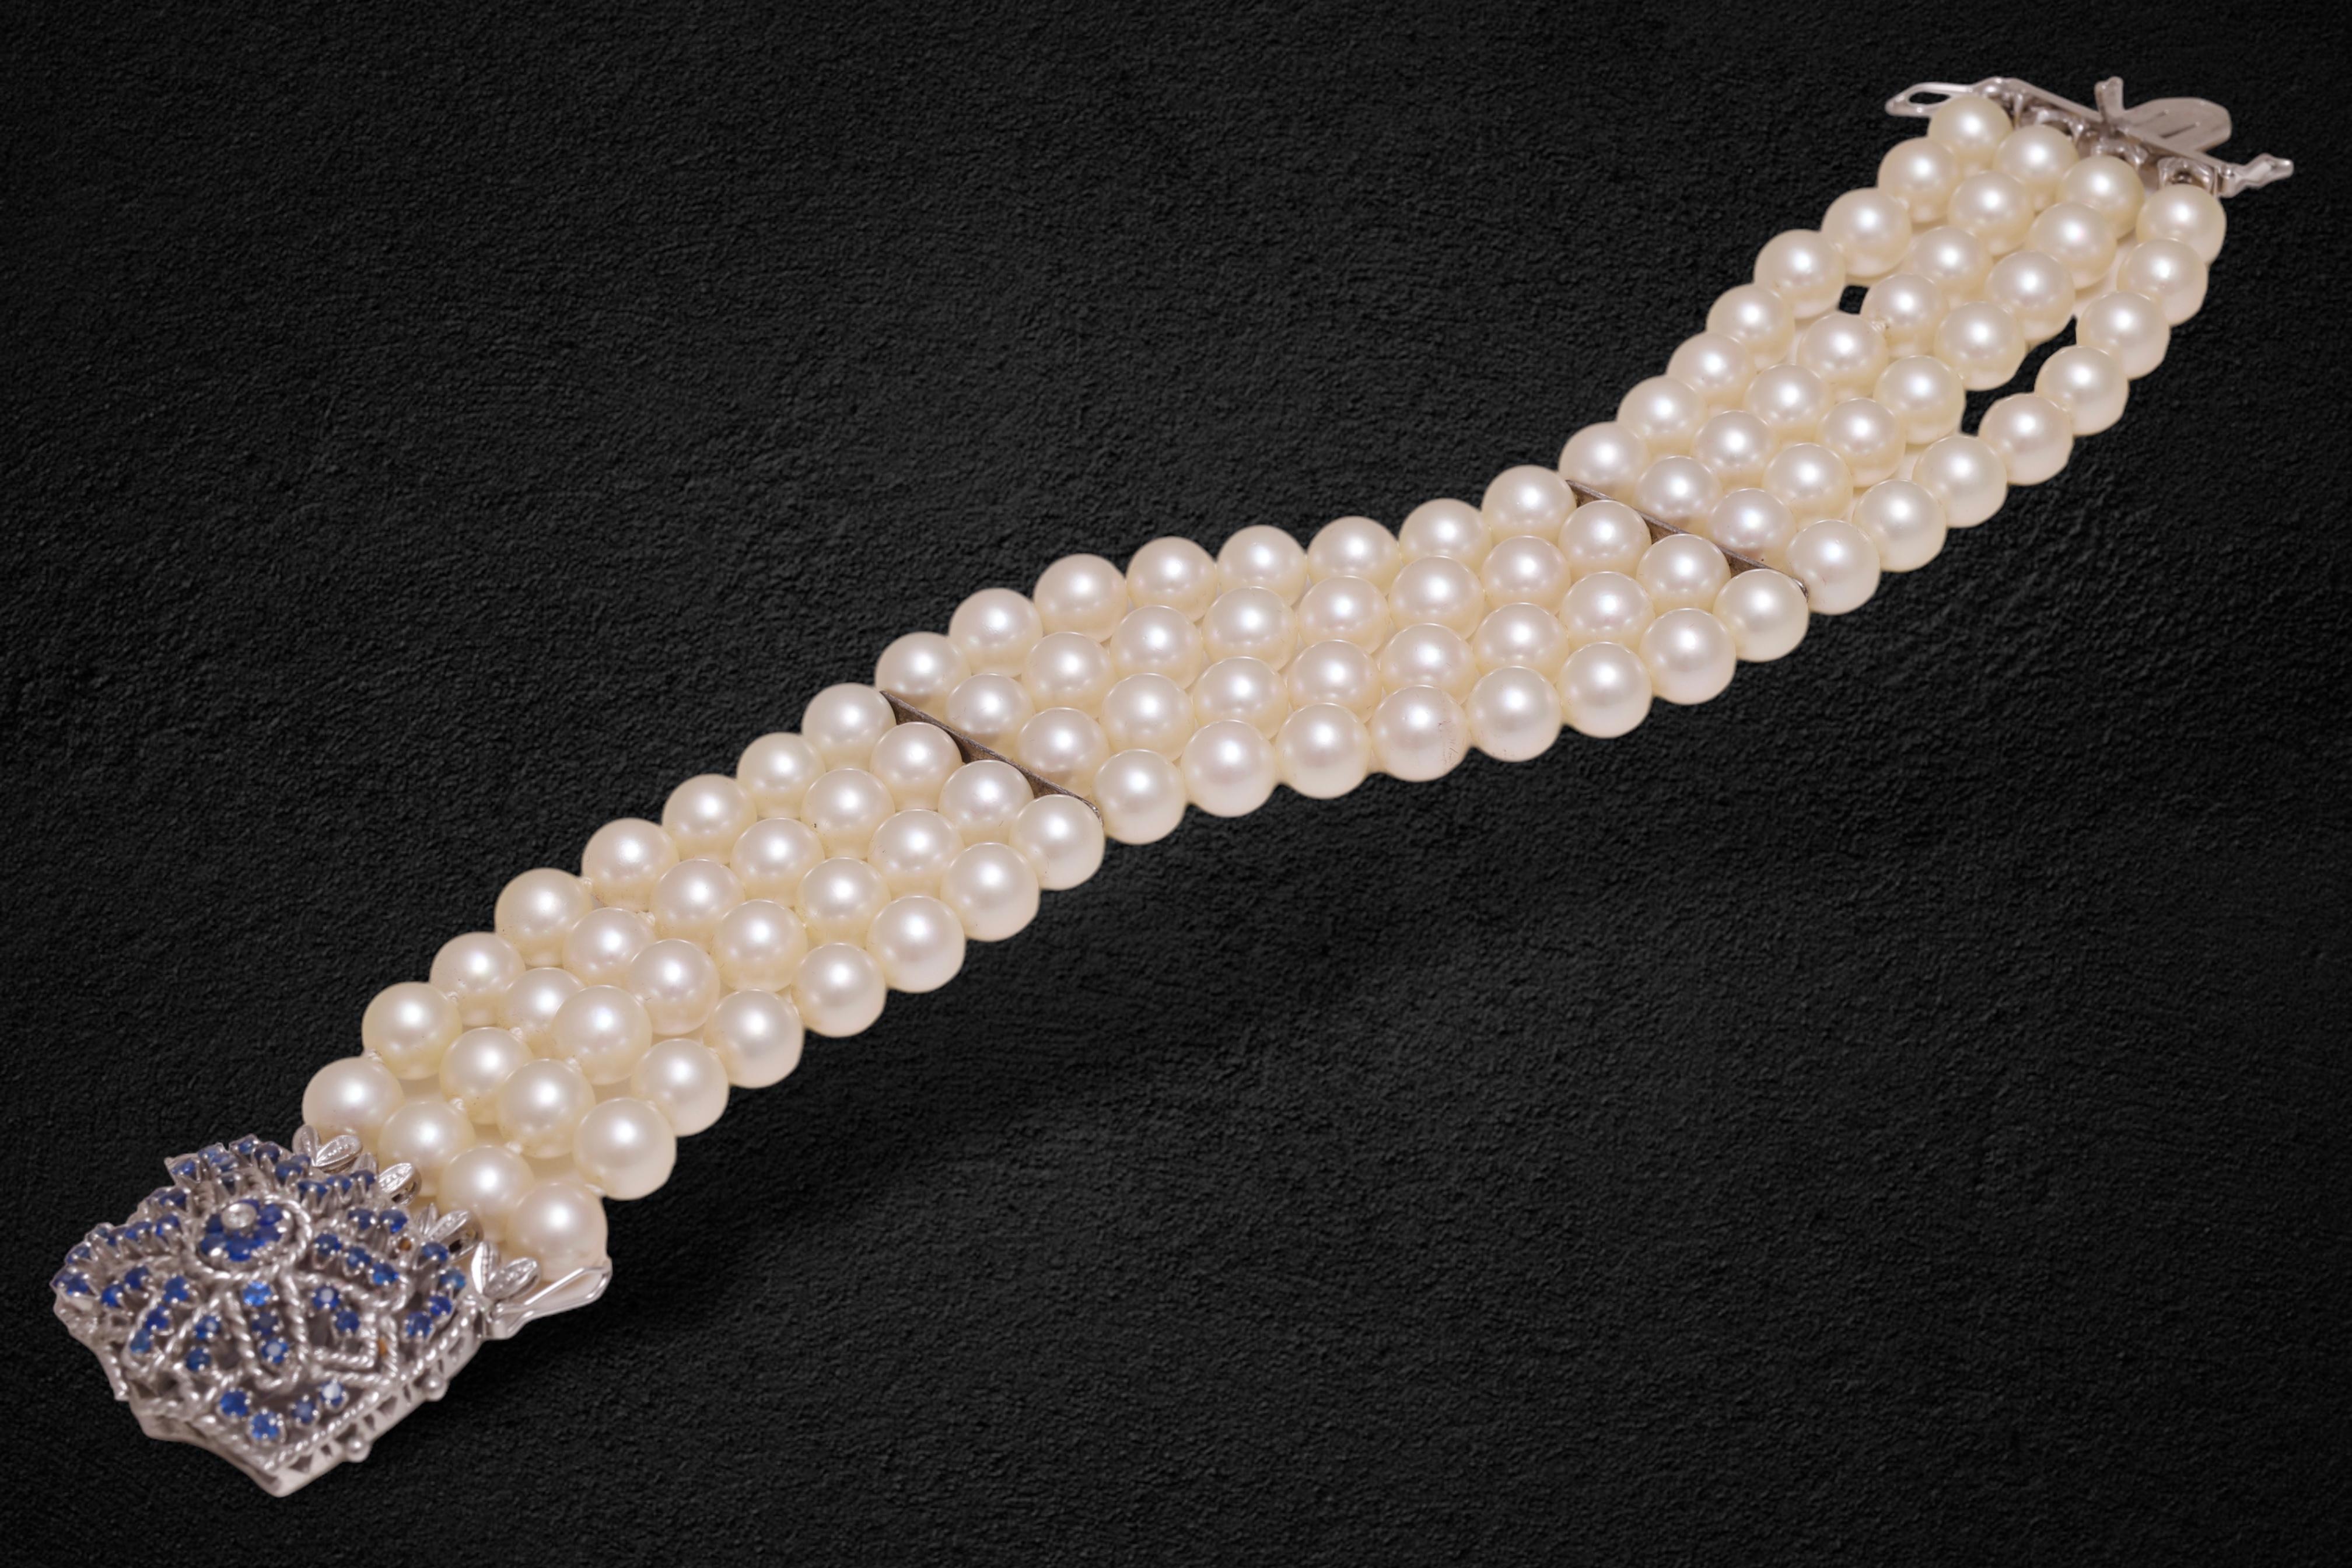 Brilliant Cut Akoya Pearl Bracelet with 18 kt. White Gold Locker with Sapphires & a Diamond For Sale